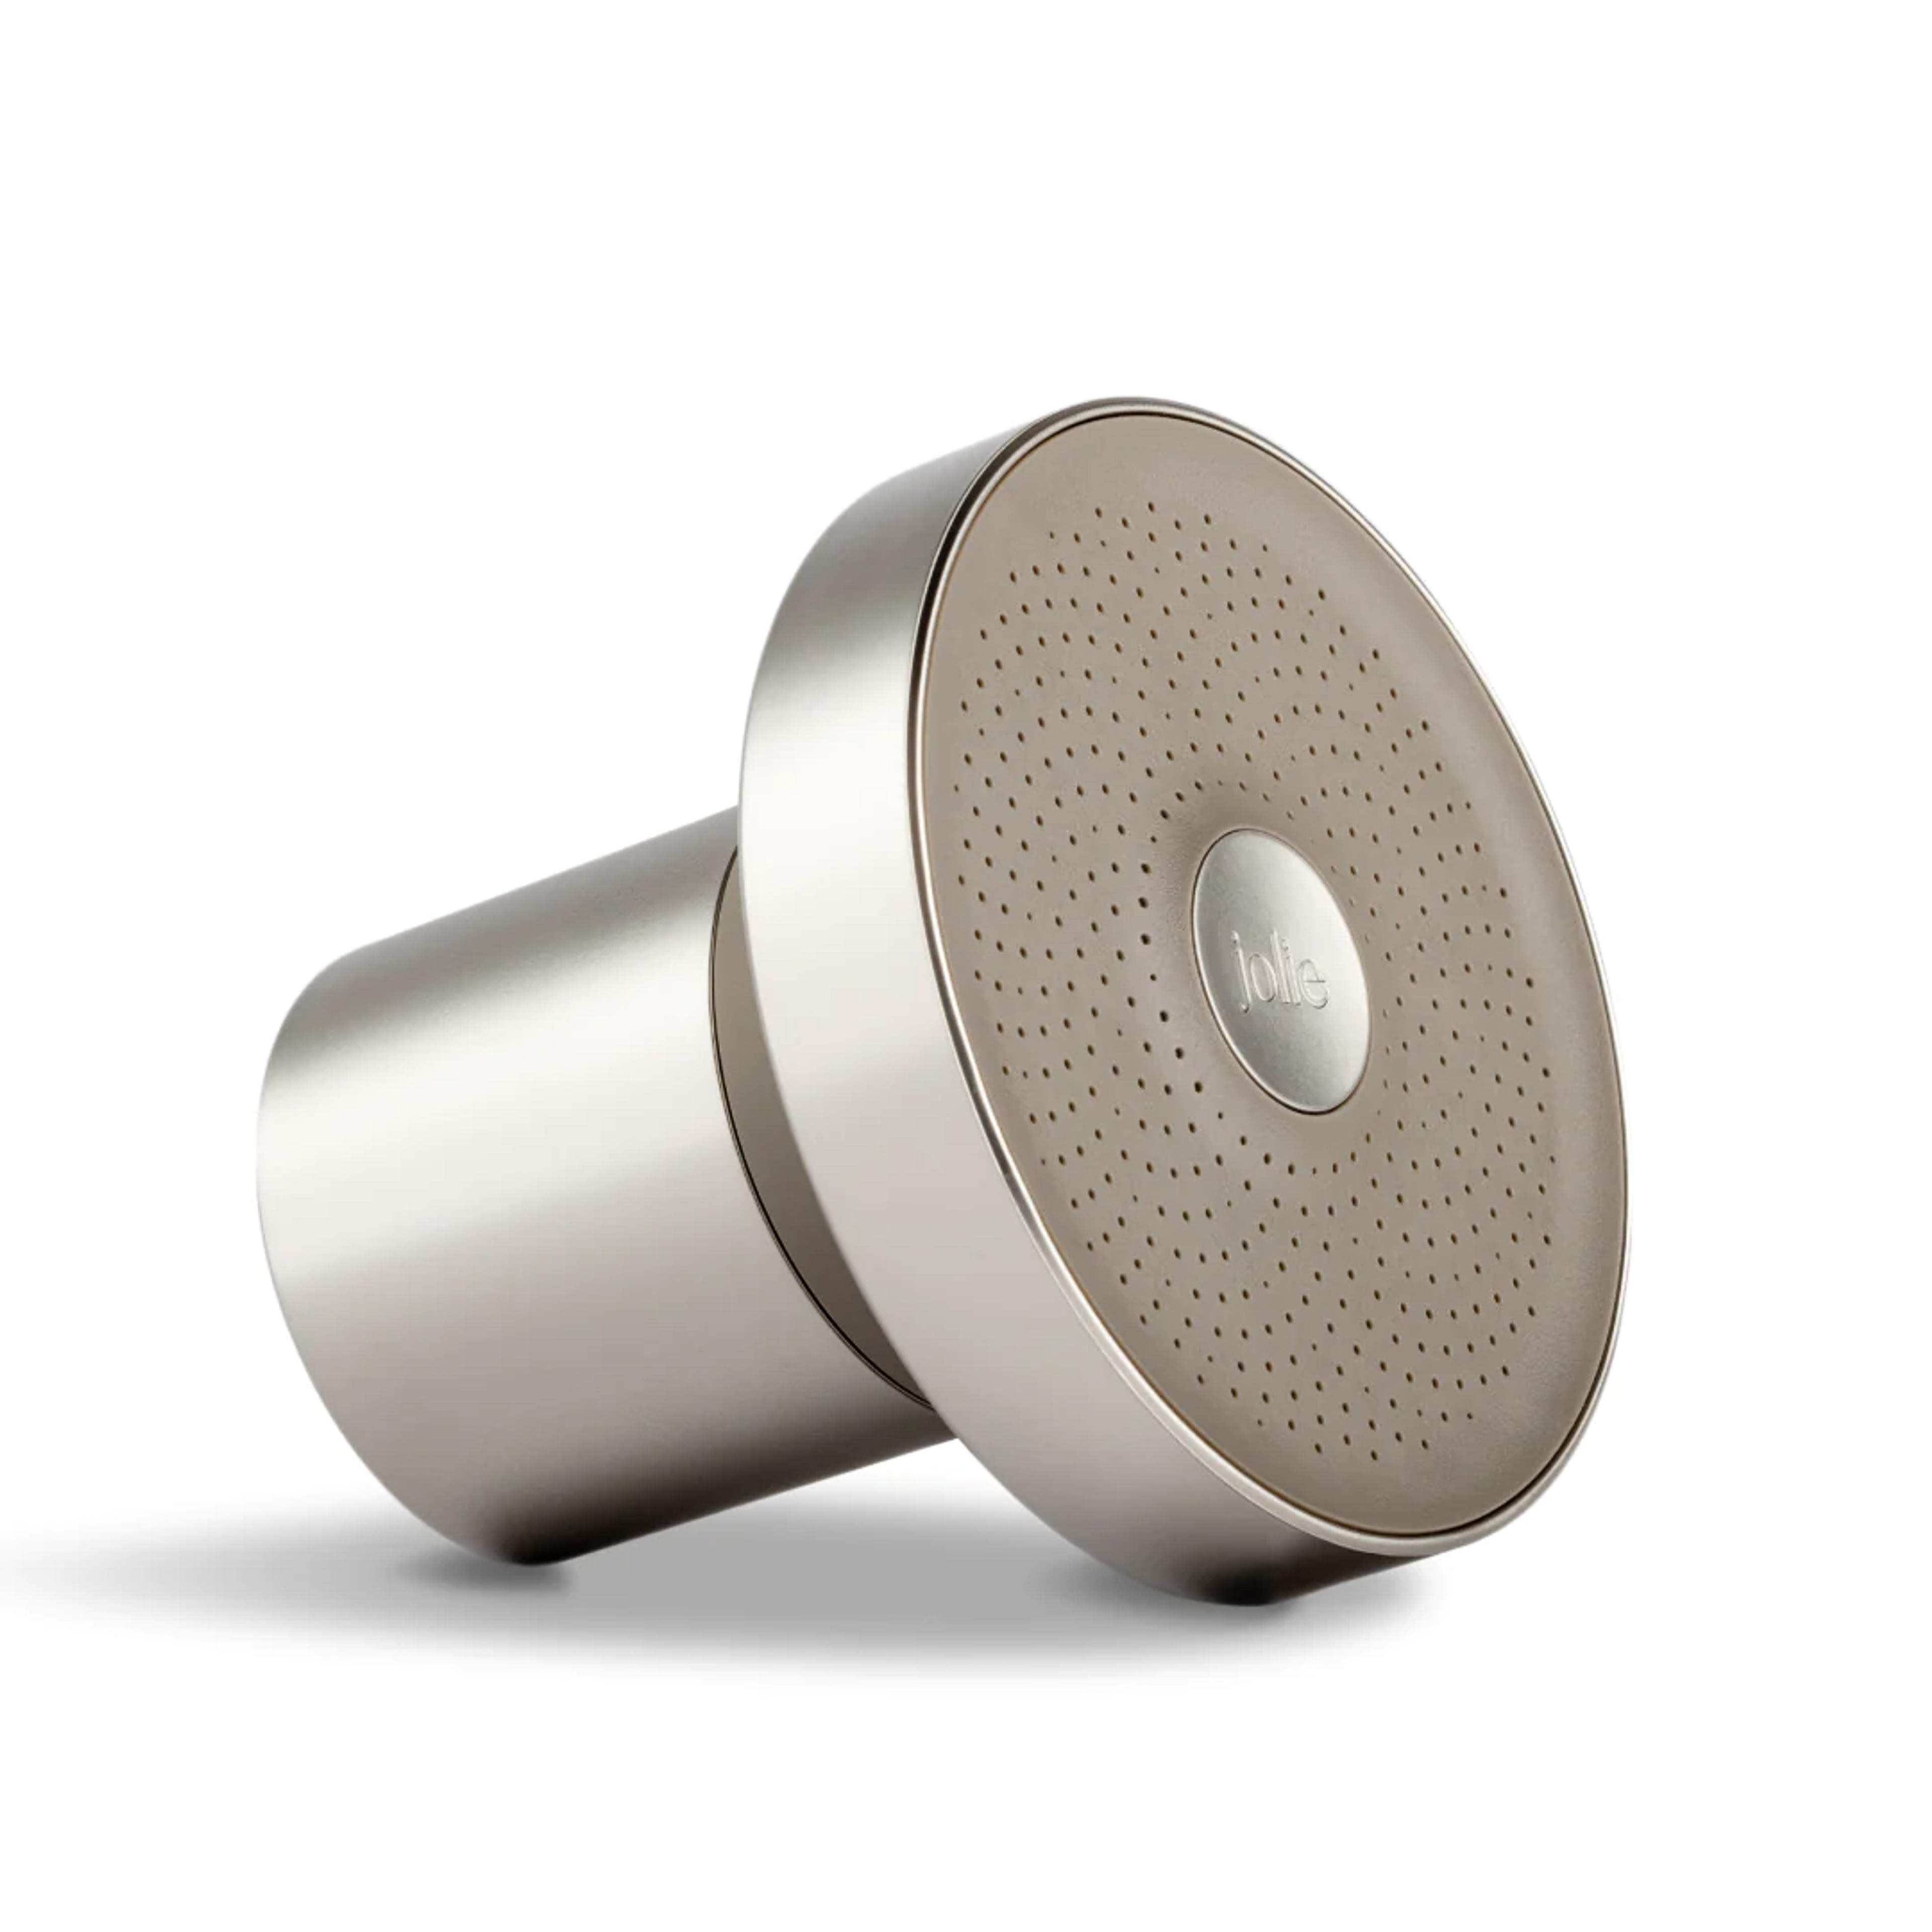 The Jolie Filtered Showerhead - Brushed Steel